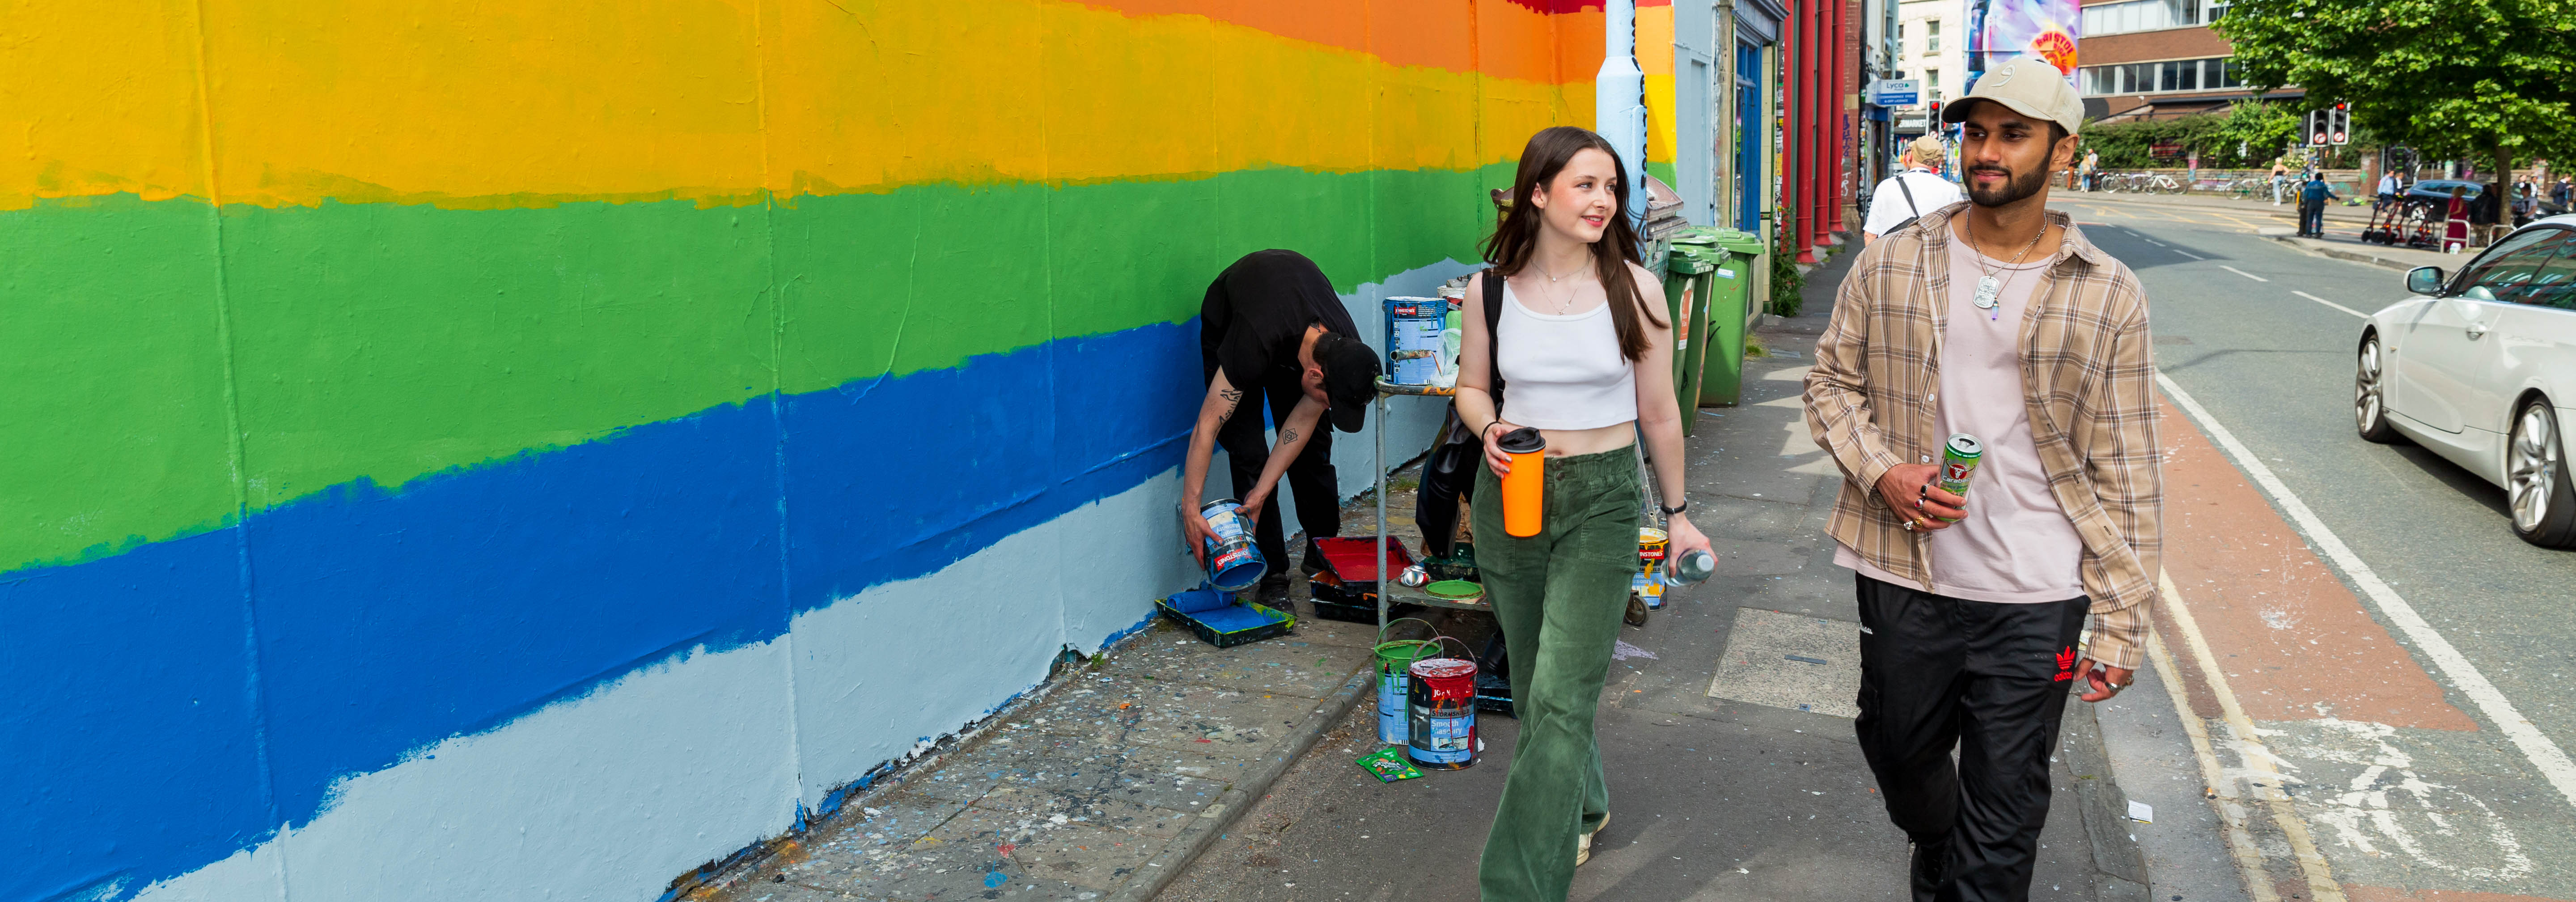 students walking down a city street in bristol, the wall to their left is painted with the pride rainbow